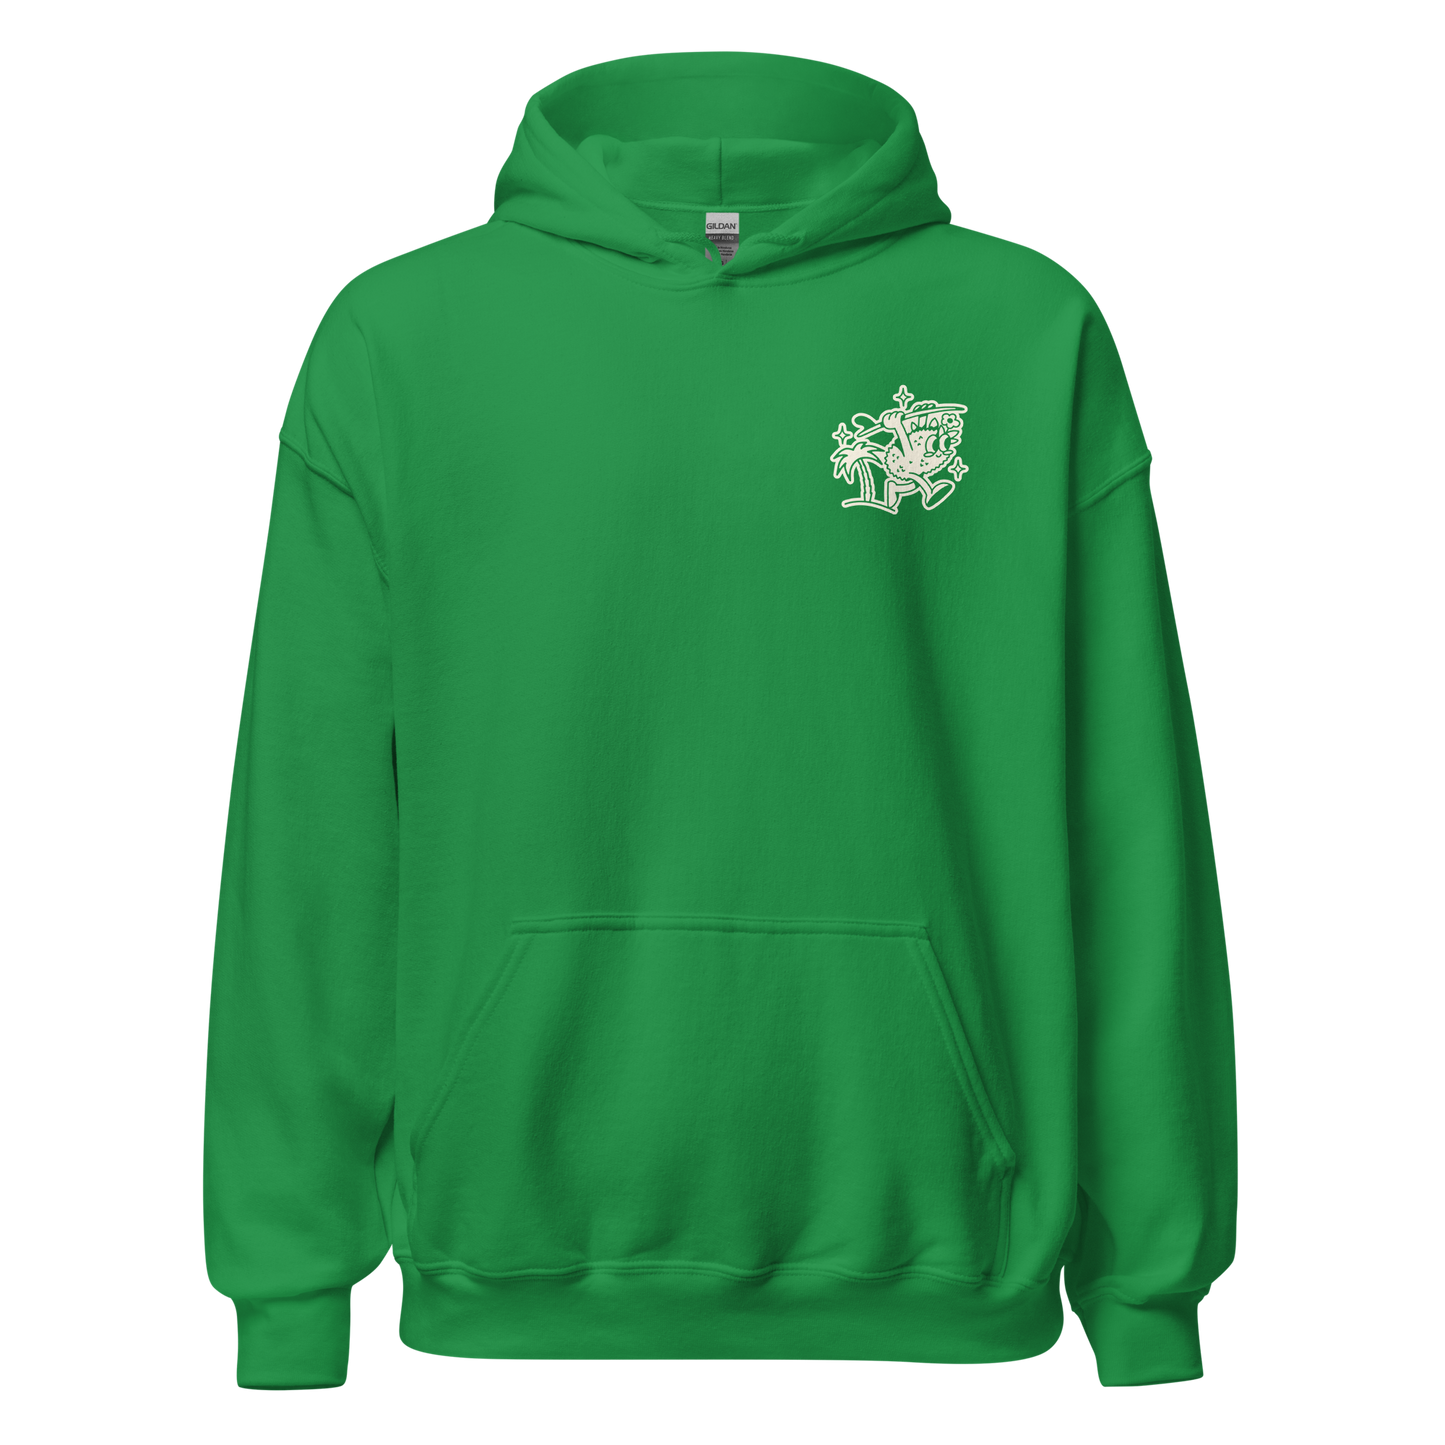 Ting's green unisex hoodie with Ting's logo on front